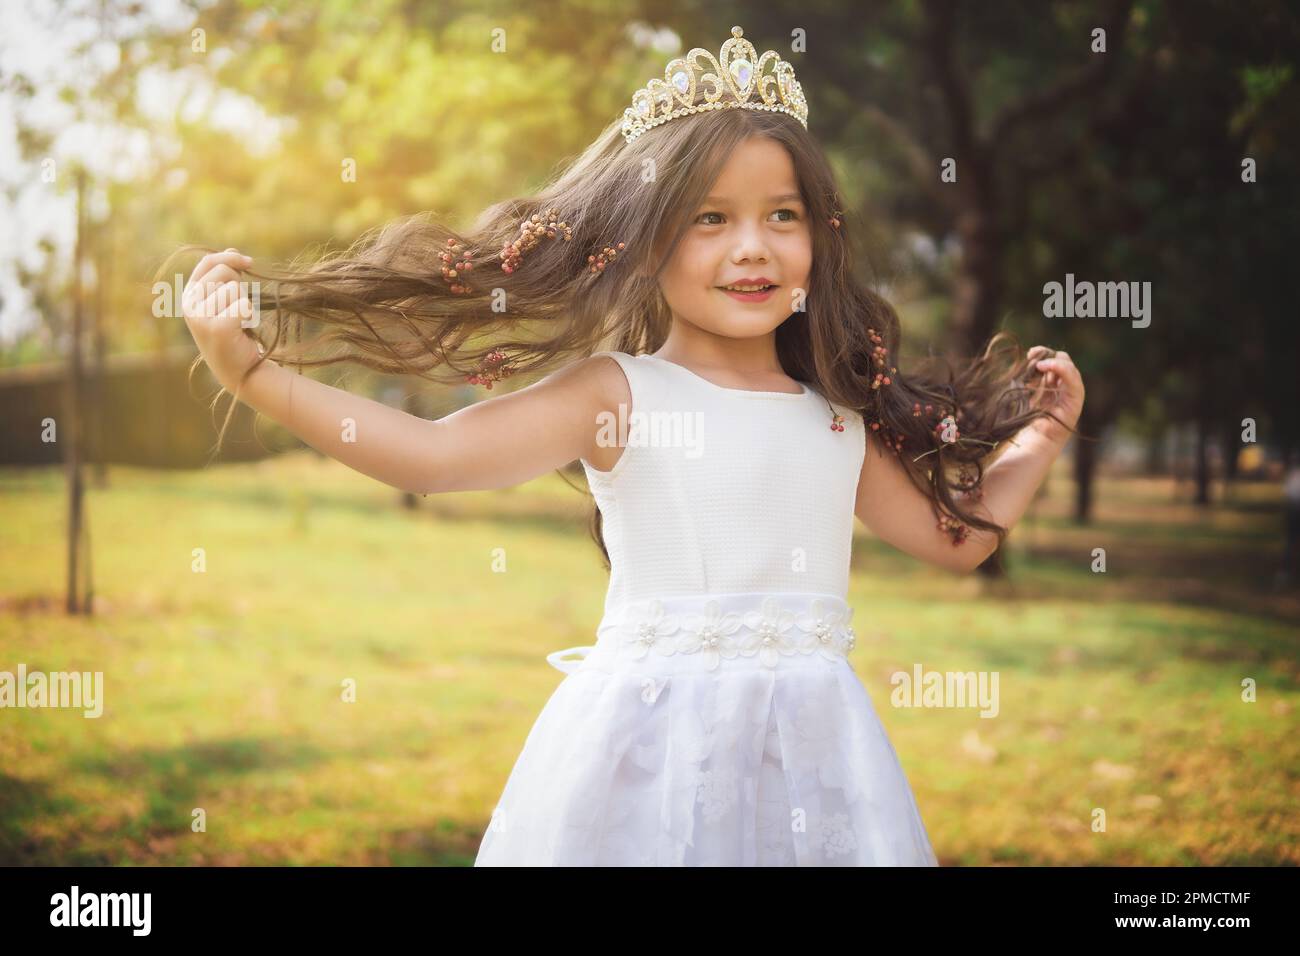 Little girl in white dress and princess crown, she plays with her long blonde hair, copy space, children's day theme. Stock Photo